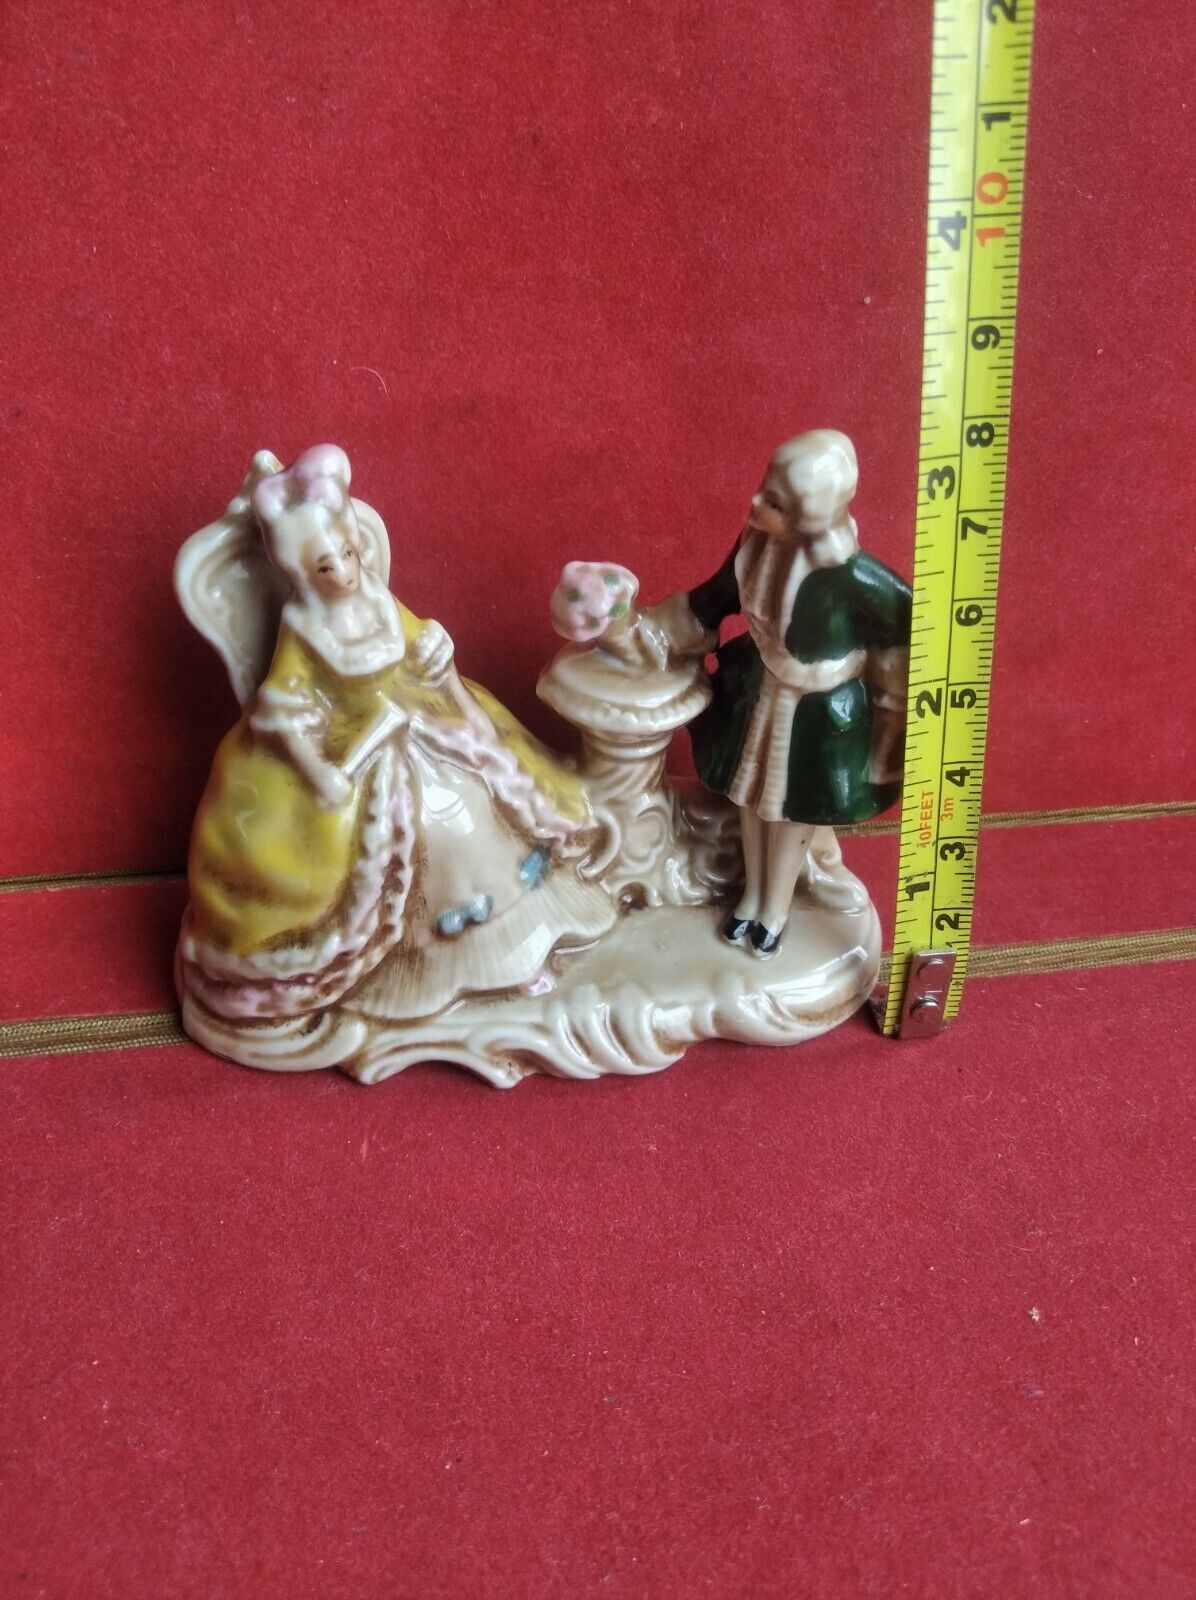 Antique numbered German Porcelain Figurine small size collectible numbered